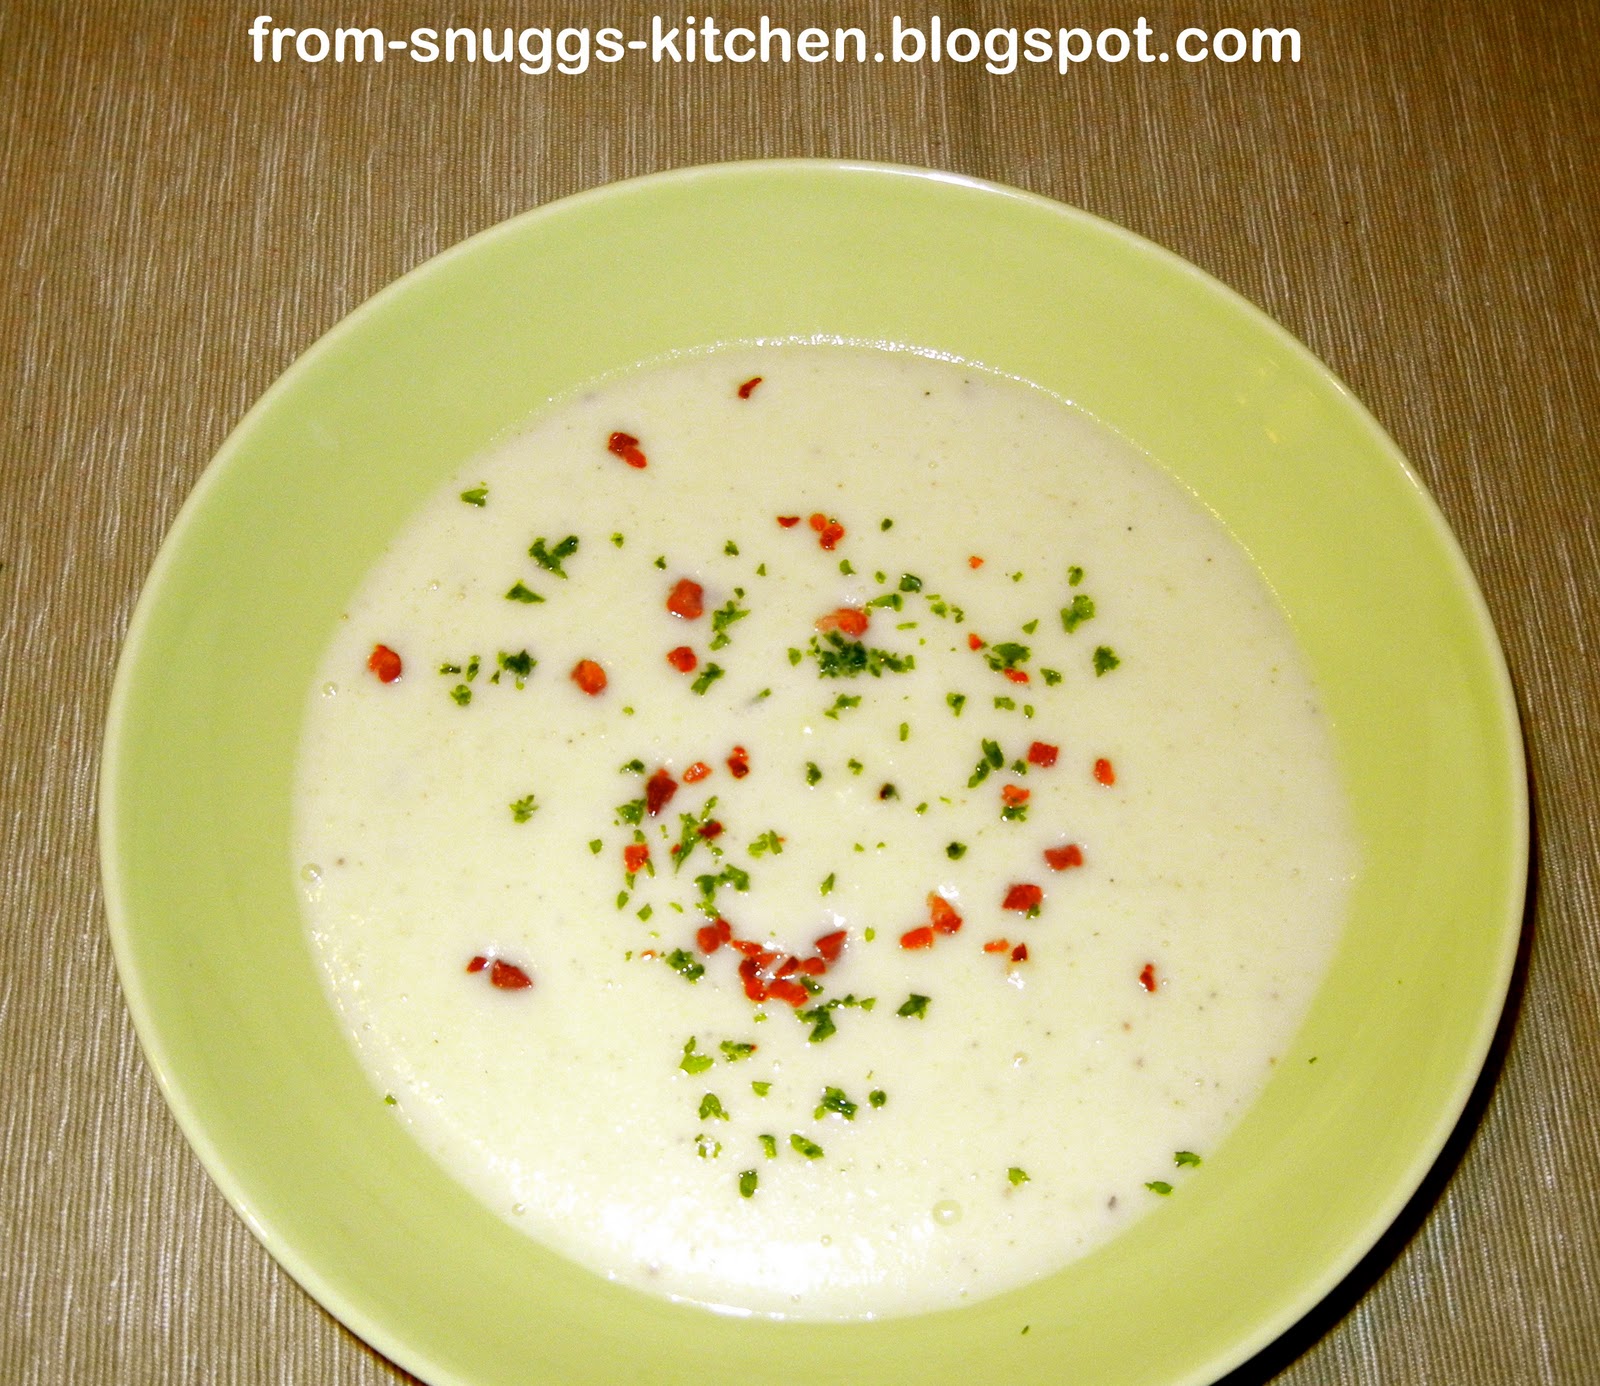 Petersilienwurzelsuppe - From-Snuggs-Kitchen